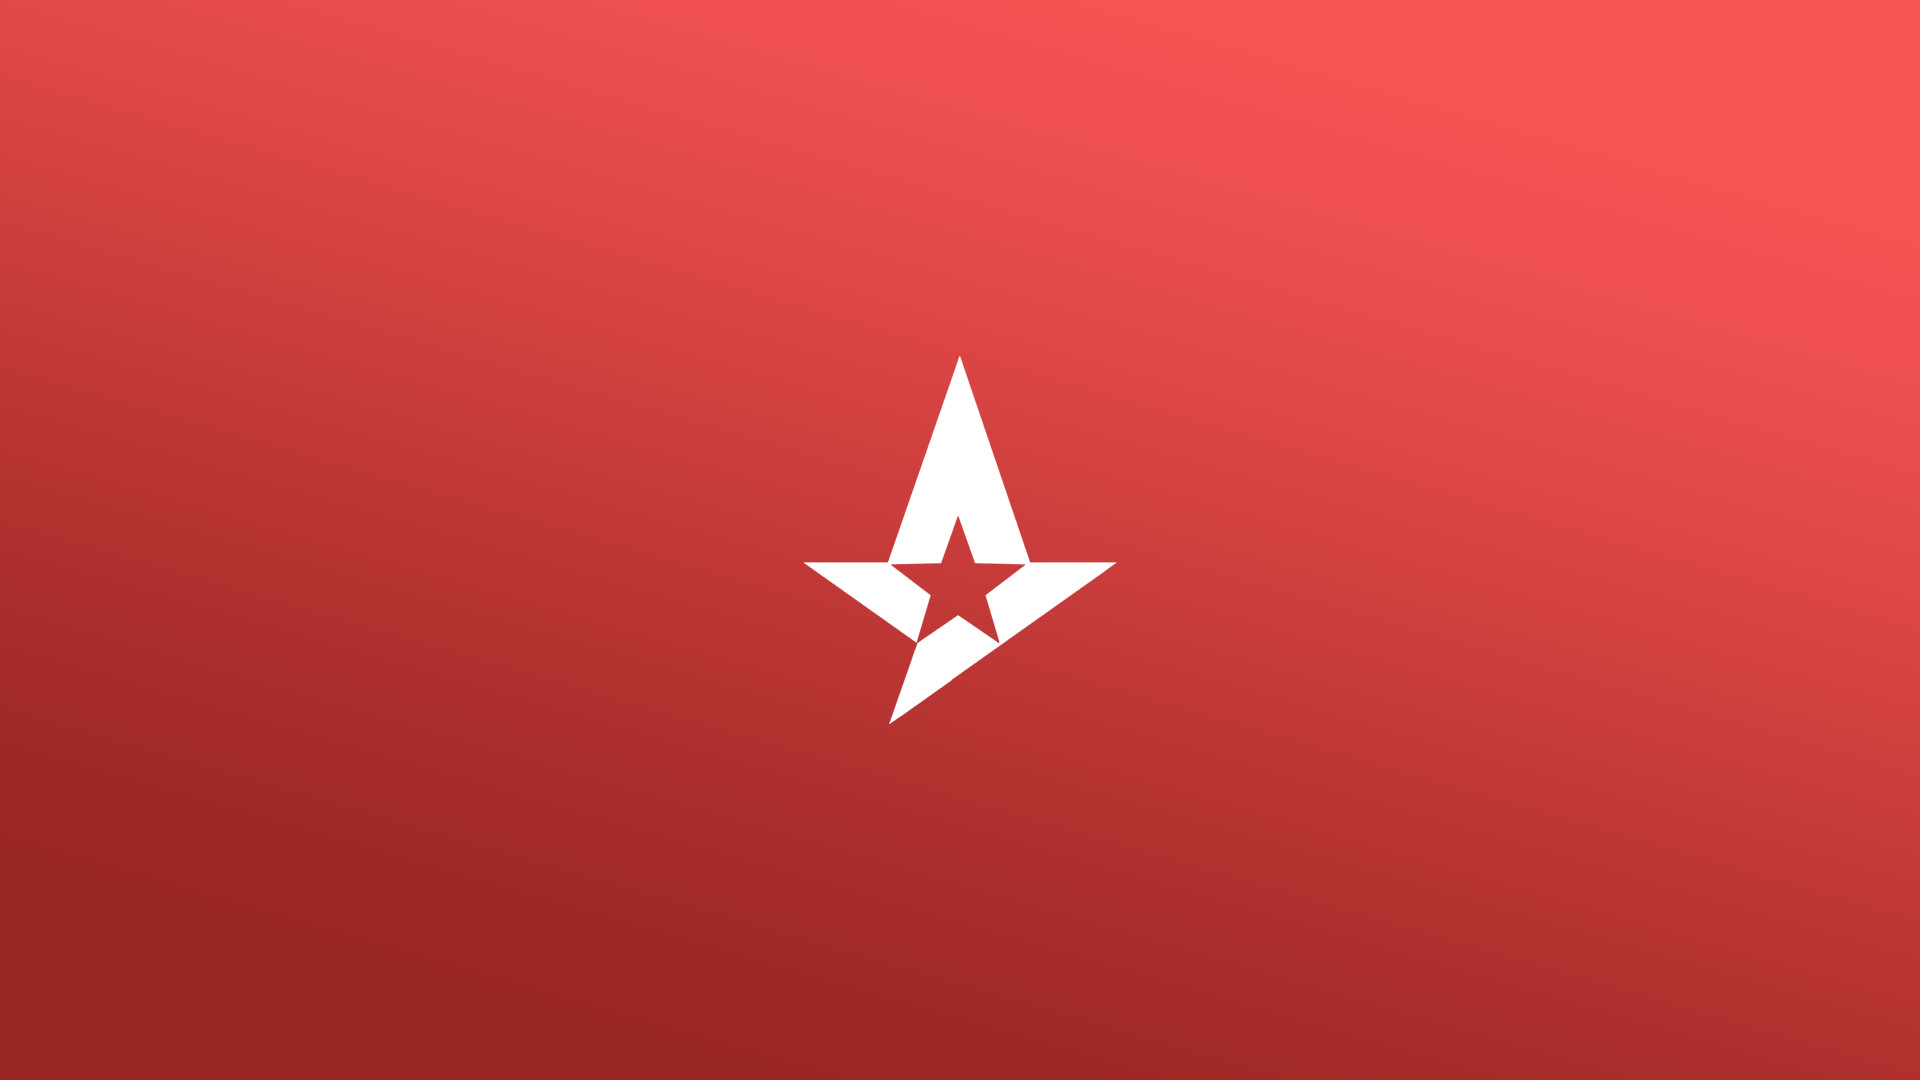 1920x1080 Astralis are a Danish organisation specialising in CSGO created by the  players. Here are some cool Astralis wallpapers that you can download and  set as your ...